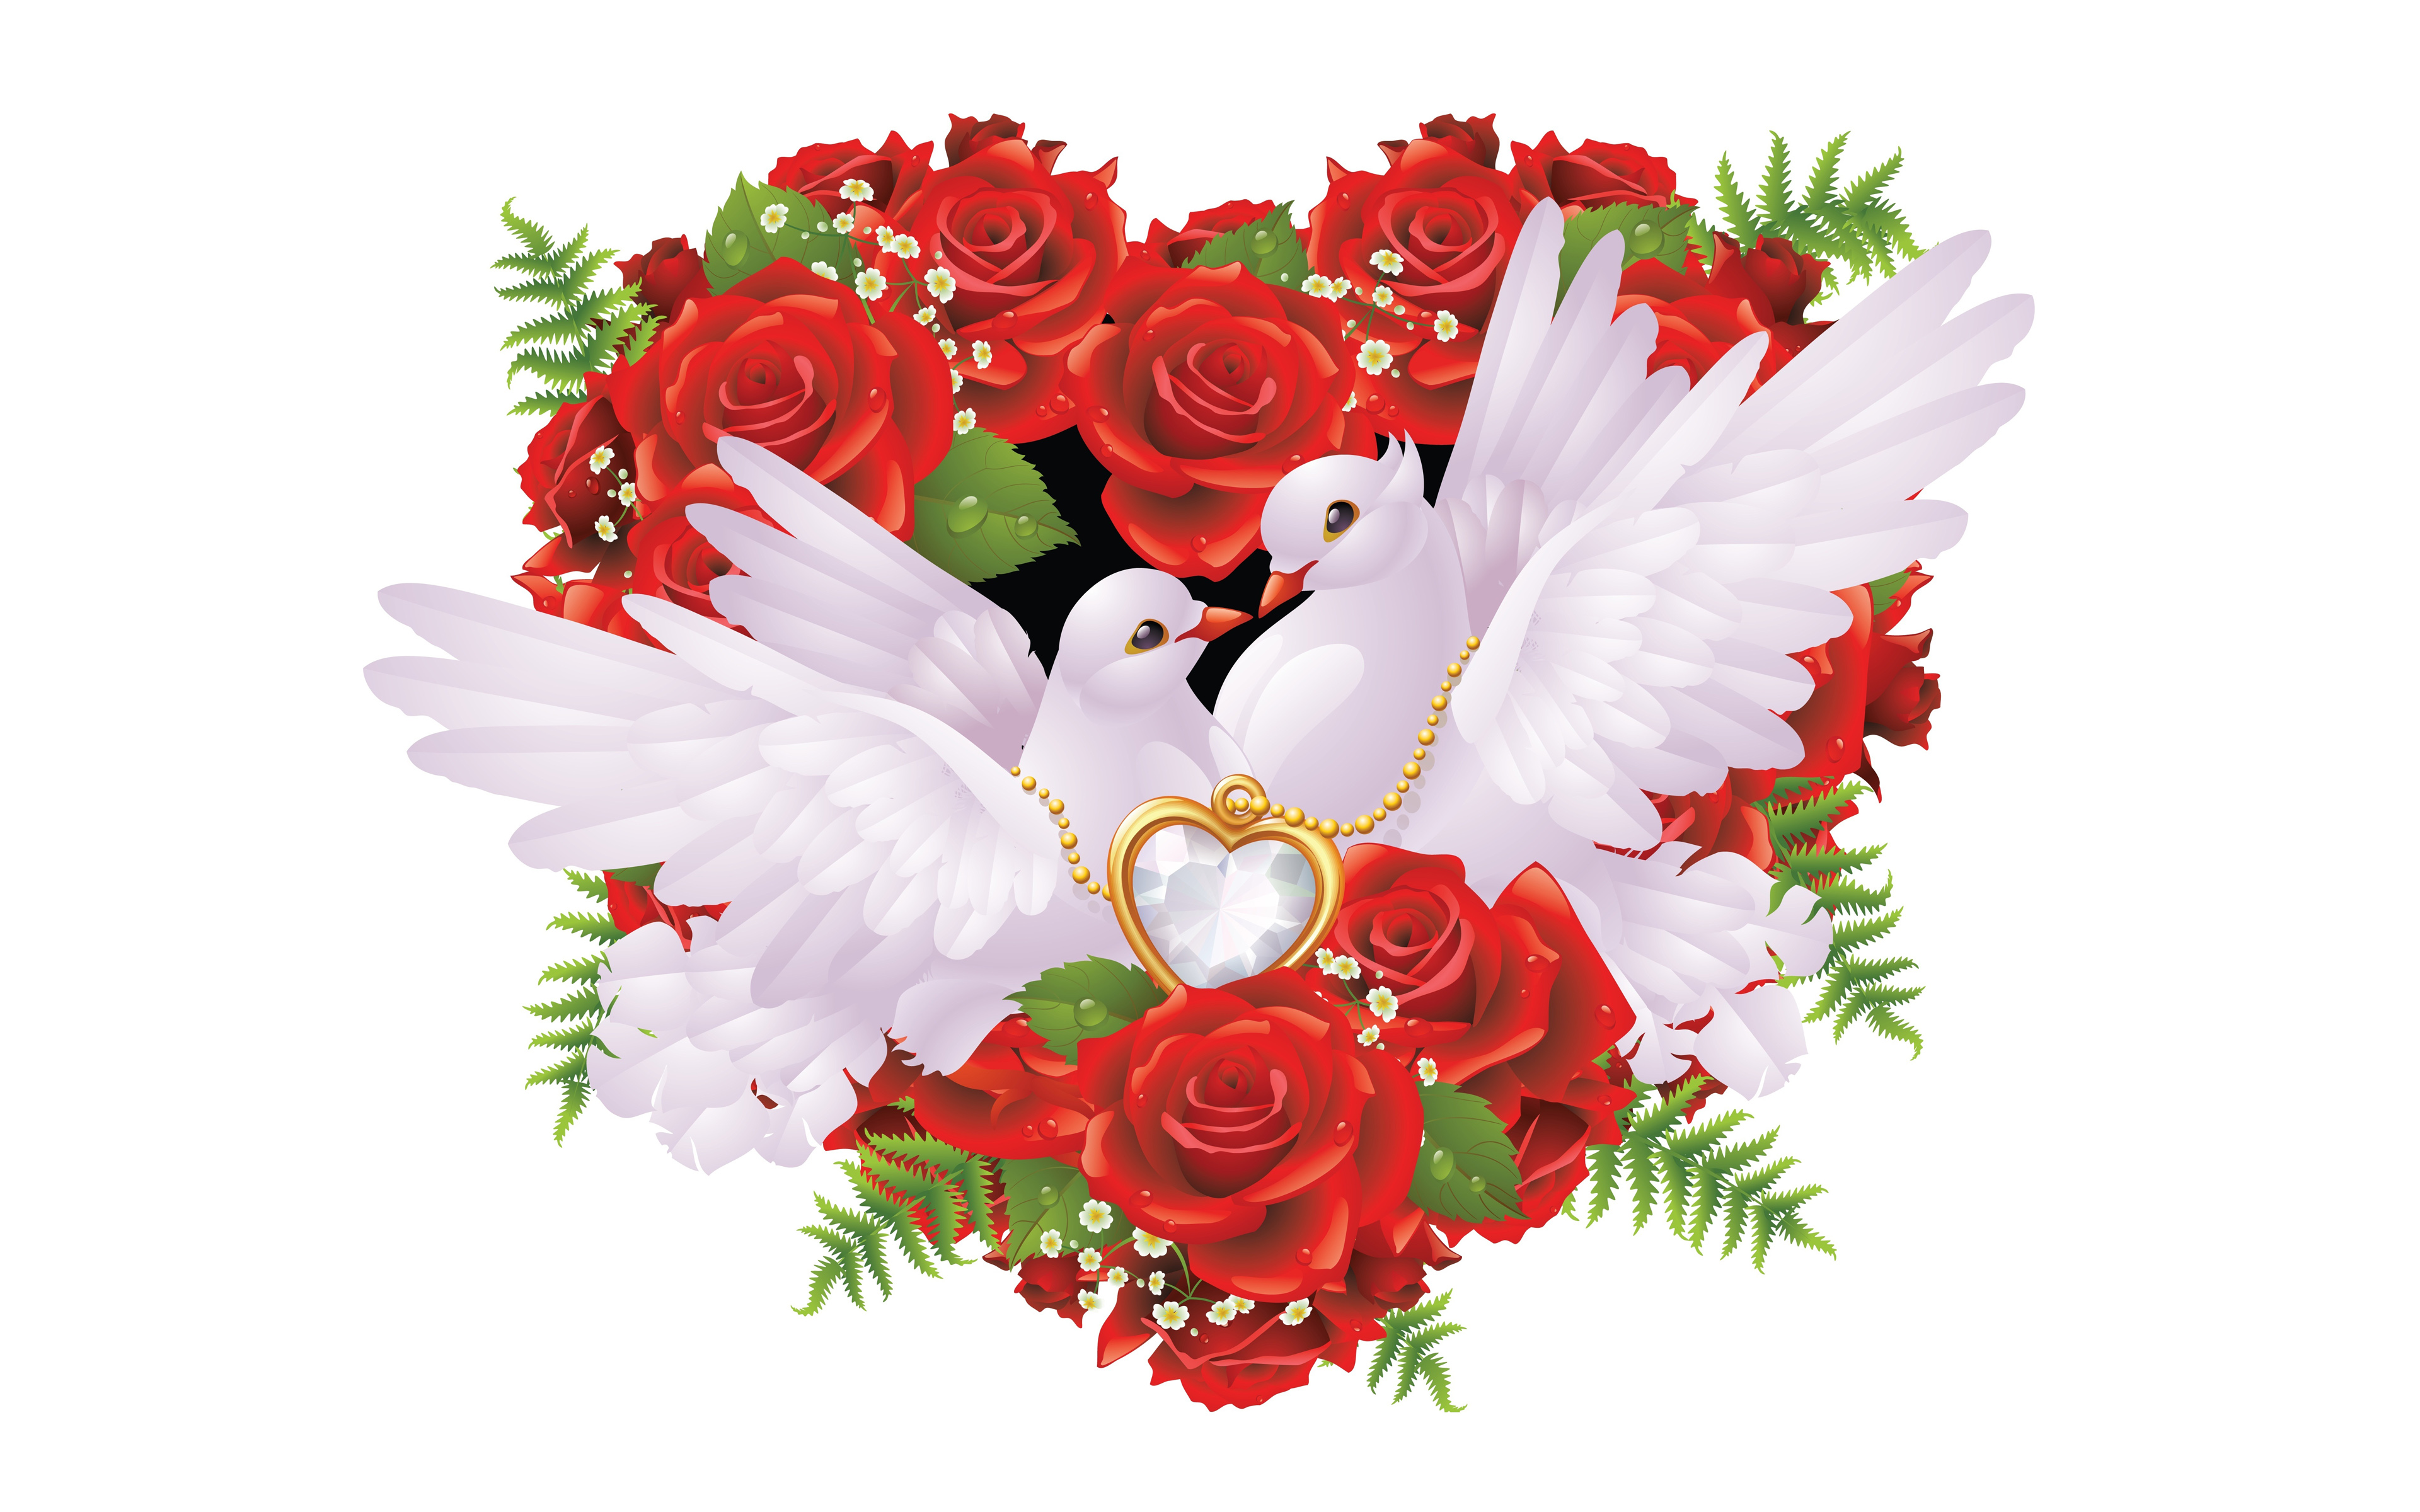 Heart From Red Roses Romantic Love On Pair White Pigeons Golden Jewelry  Heart And White Diamond Love Wallpaper Hd 3840x2400 : 